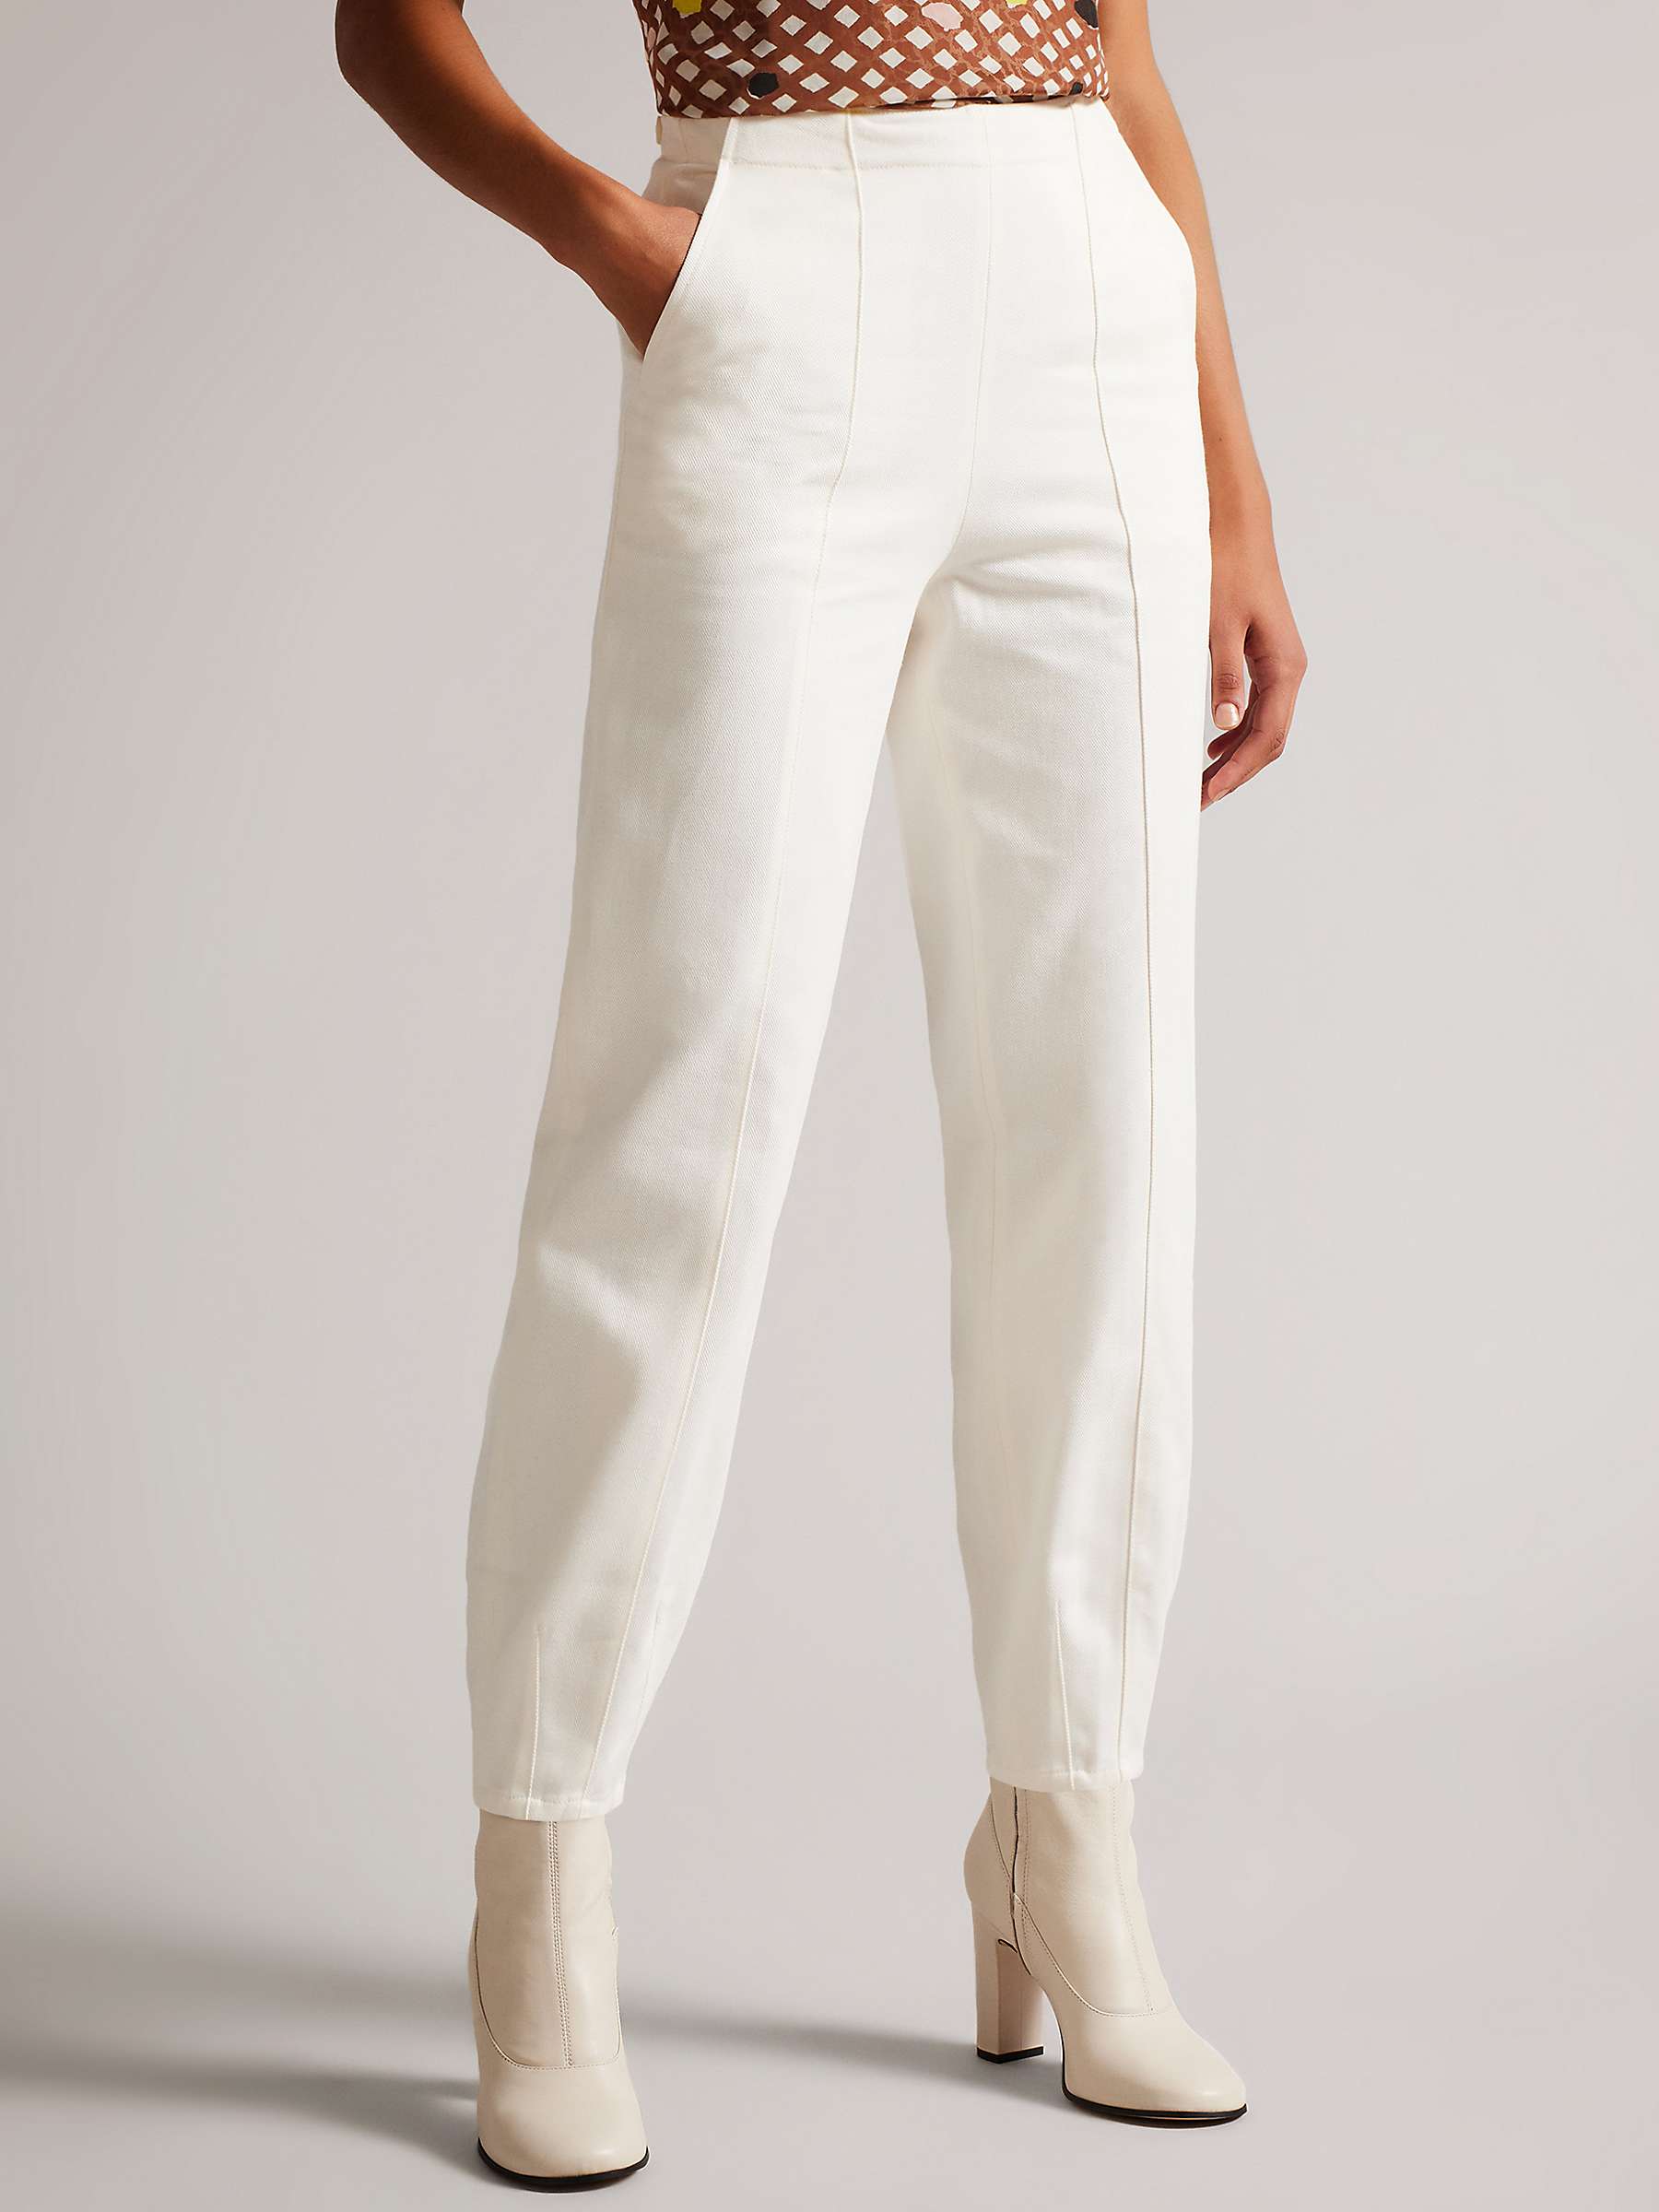 Ted Baker Eliona Pin Tuck Barrel Trousers, Ivory at John Lewis & Partners